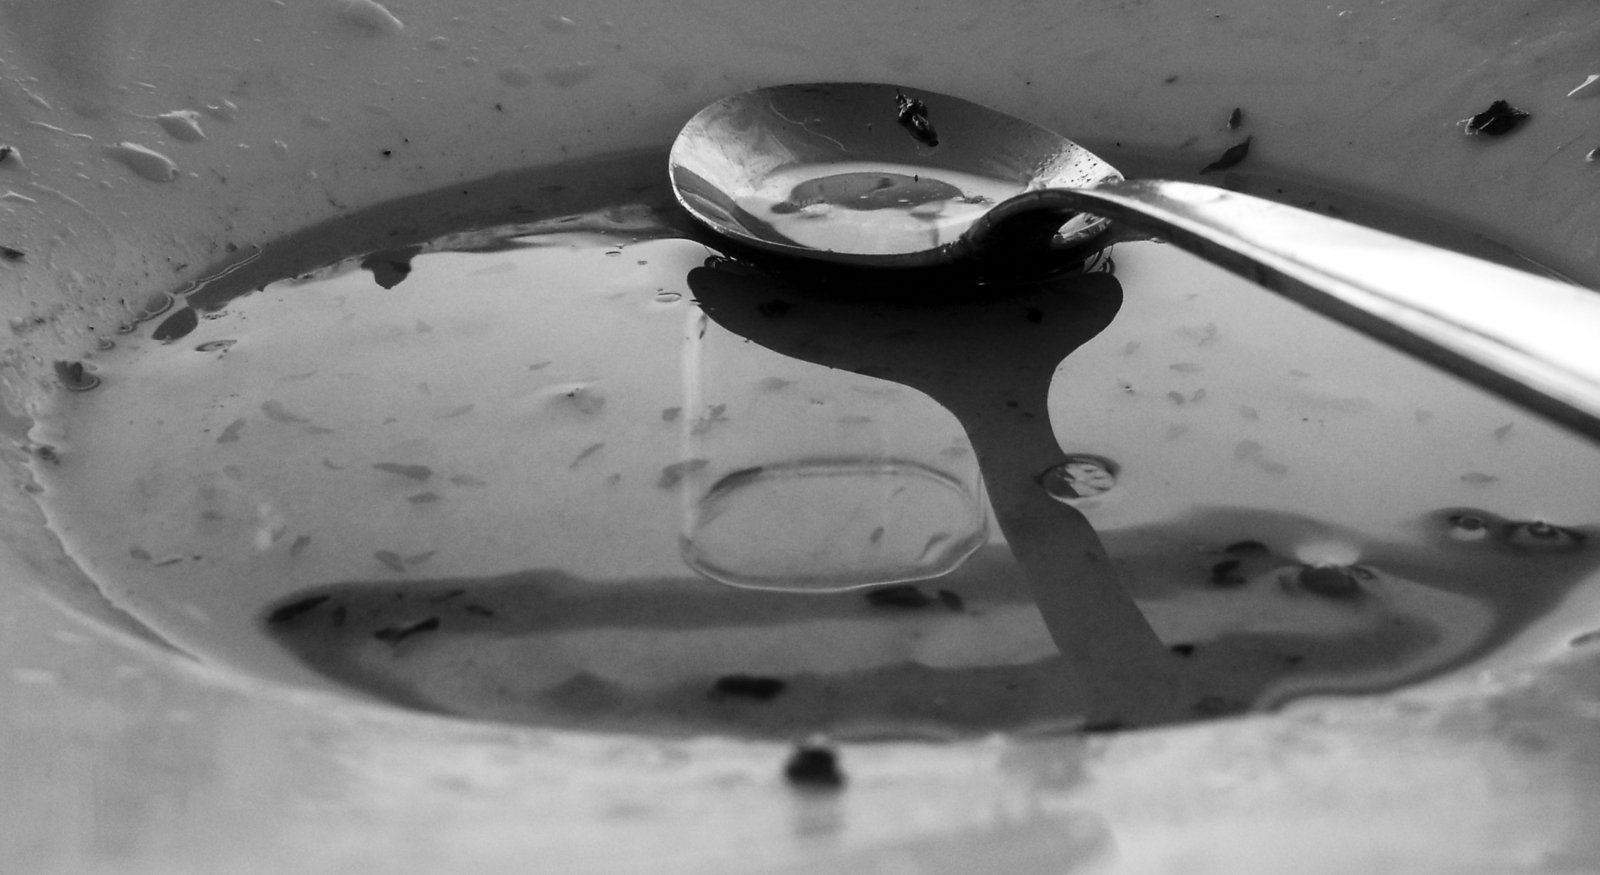 a spoon is sitting in some water